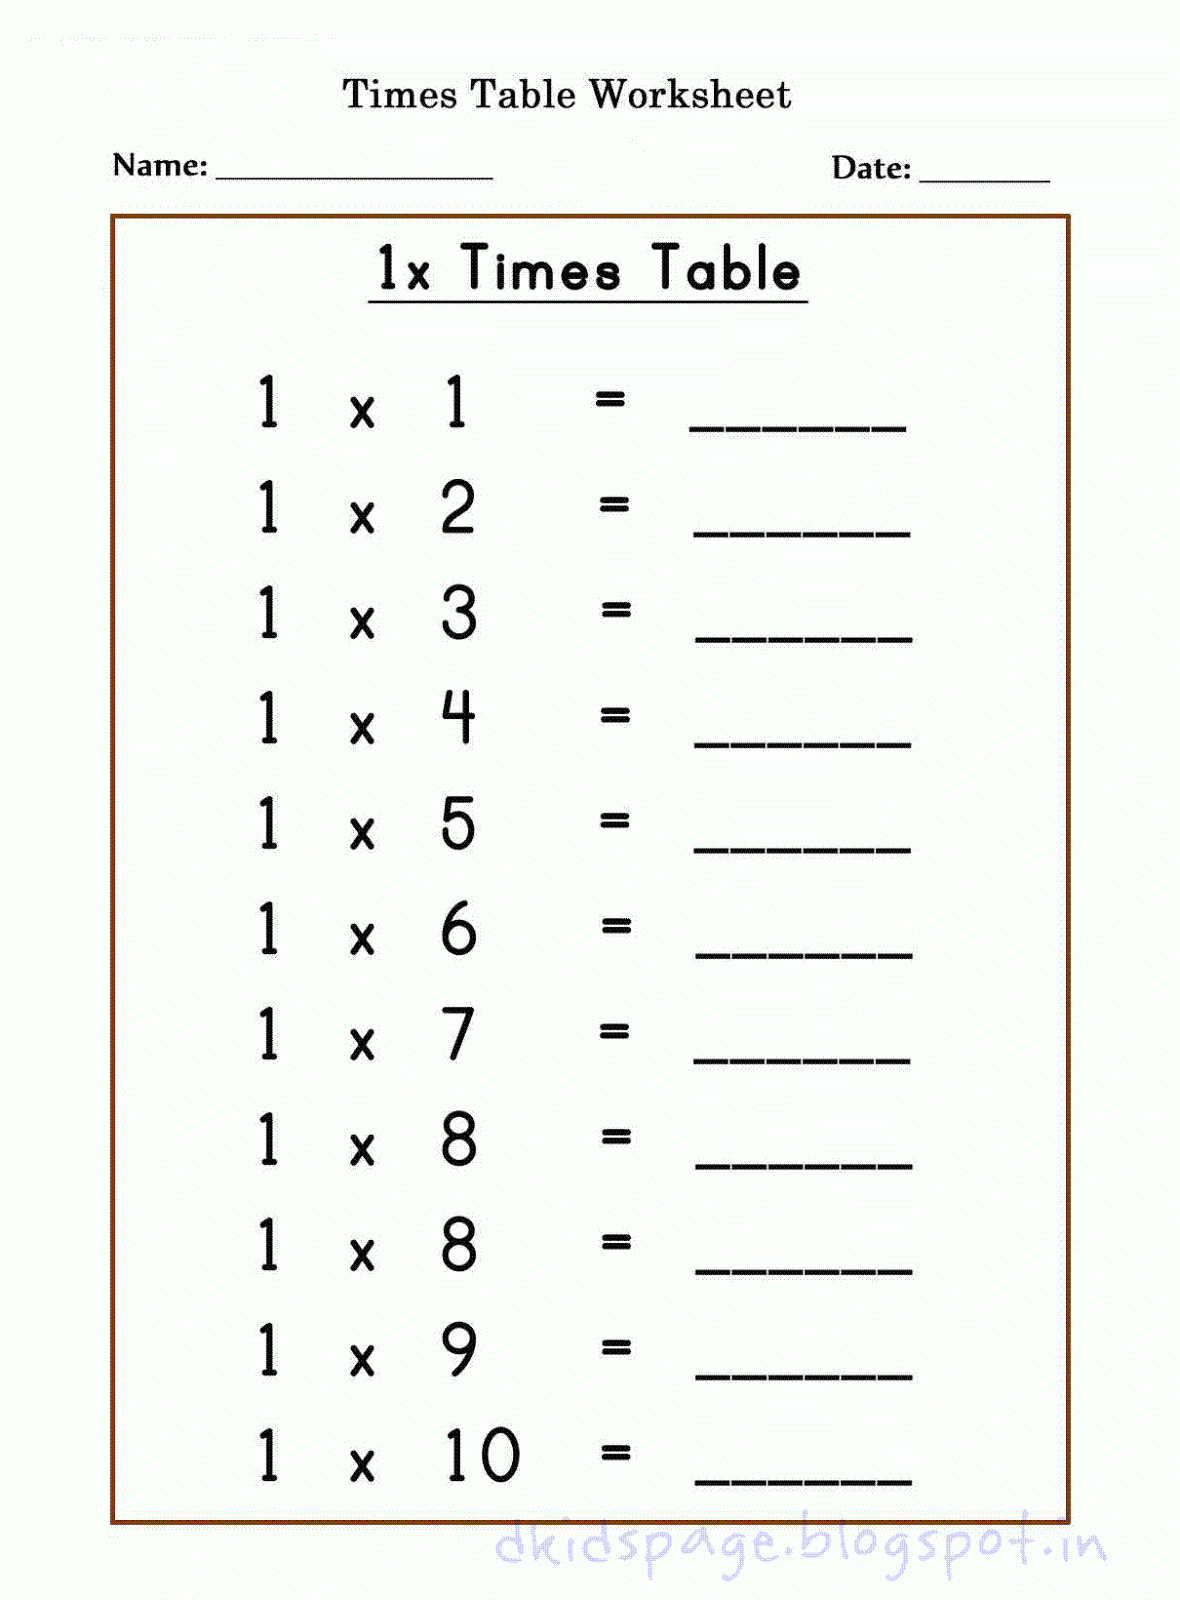 Kids Page: Printable 1 X Times Table Worksheets For Free - Free Printable Abacus Worksheets